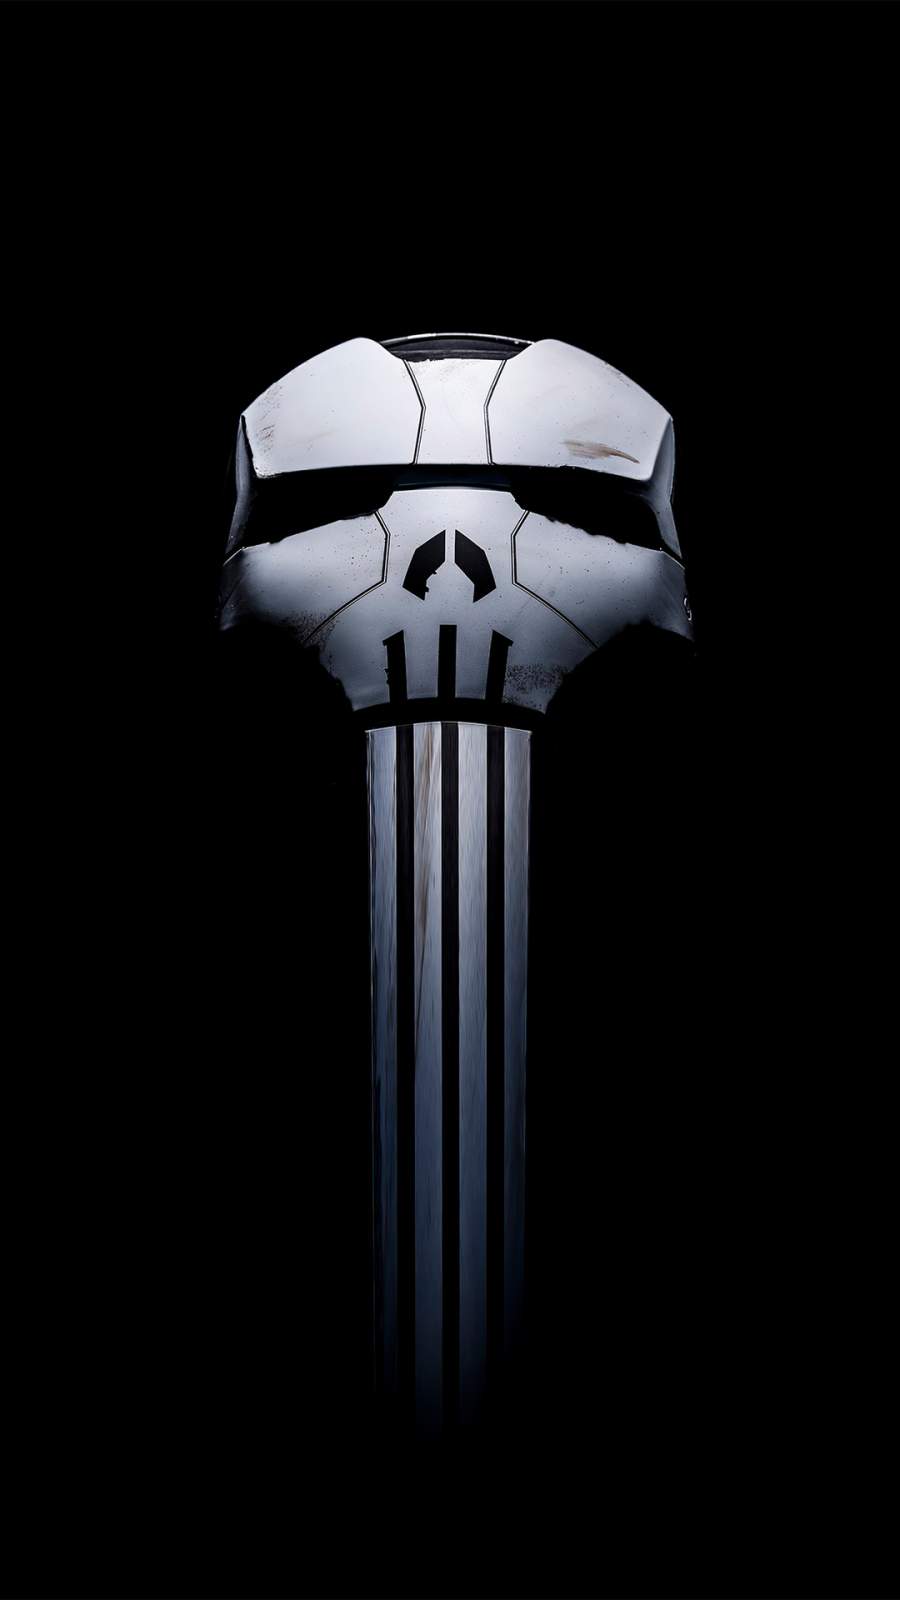 The Punisher Iphone Wallpapers